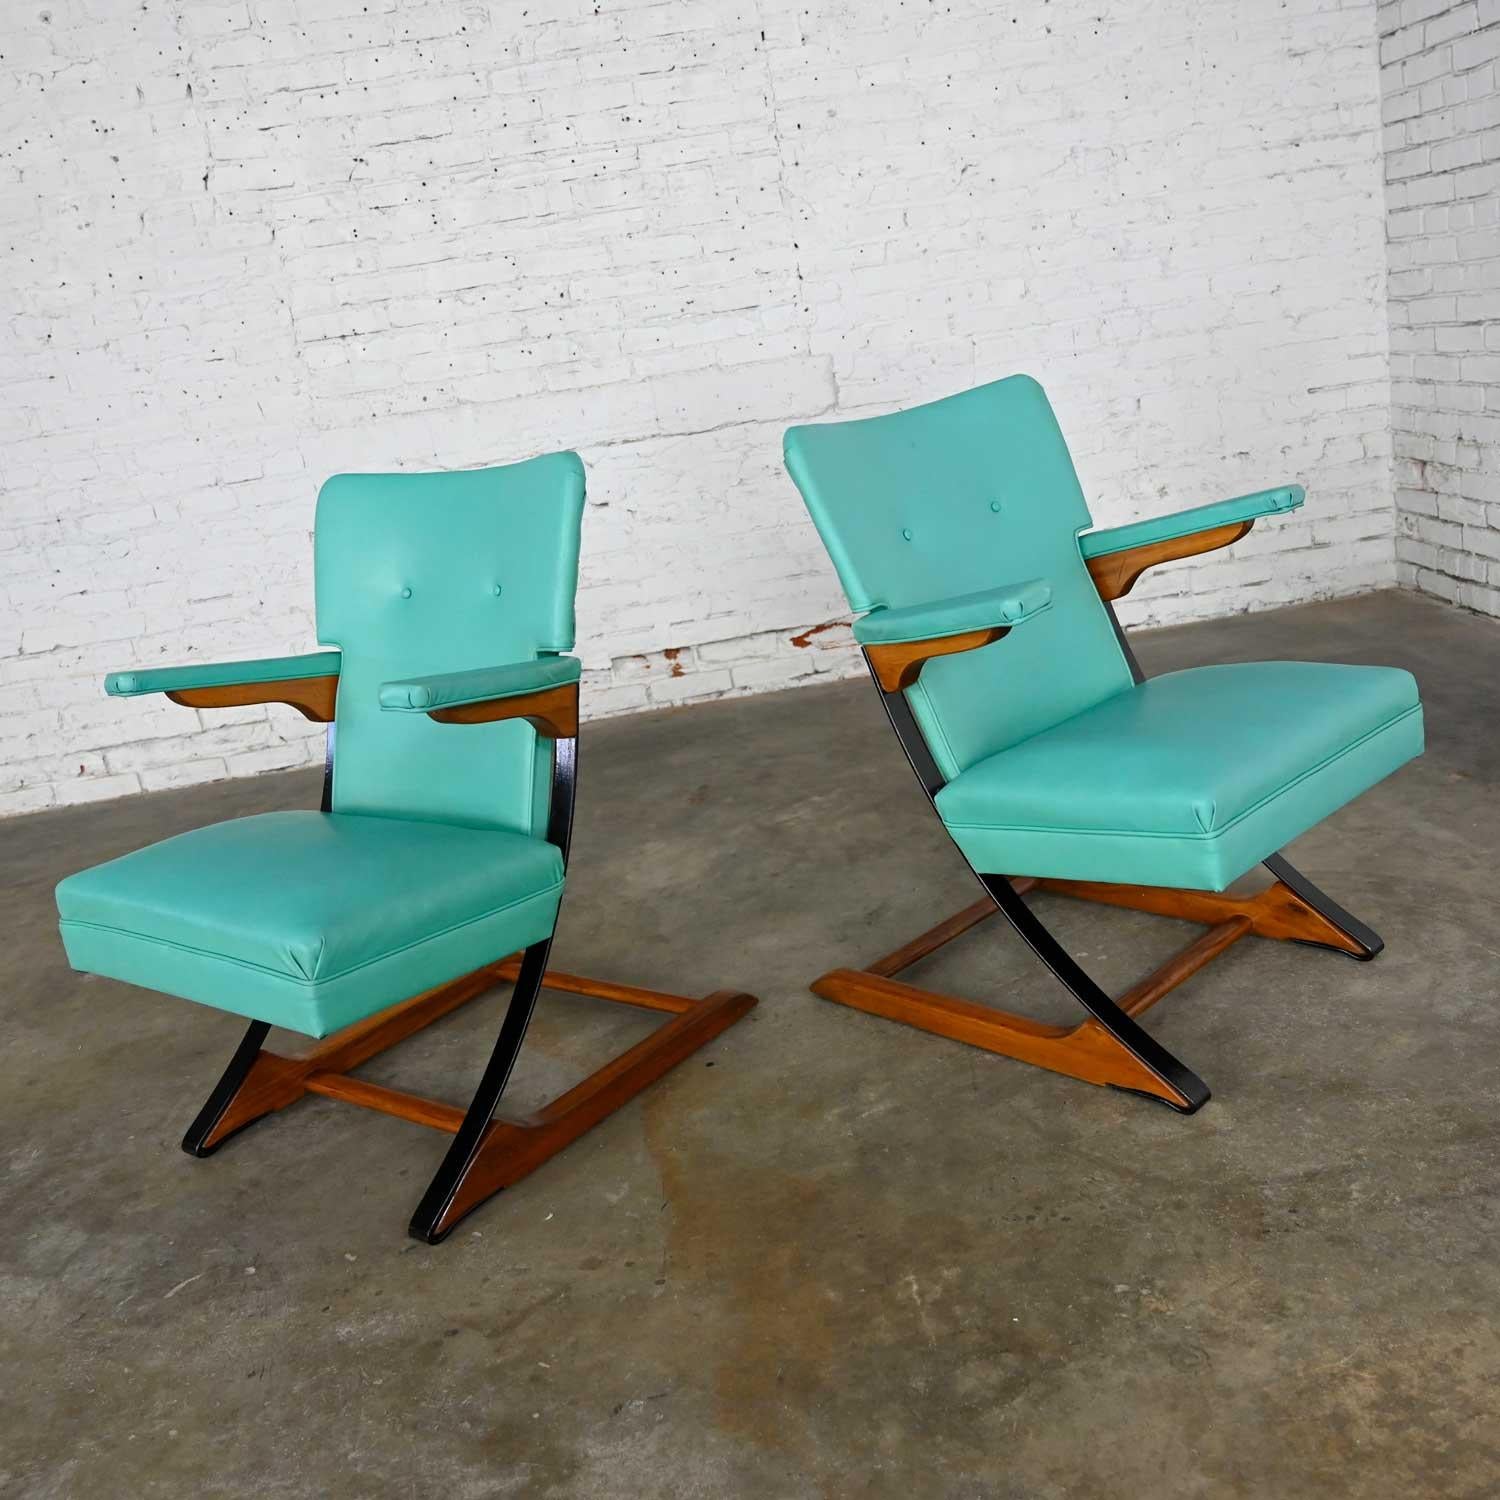 Fantastic pair of Mid-Century Modern turquoise vinyl or faux leather spring rockers style of McKay Furniture and Rock-A-Chair. Comprised of the original turquoise vinyl or faux leather, a wood frame, and black painted metal springers. Beautiful